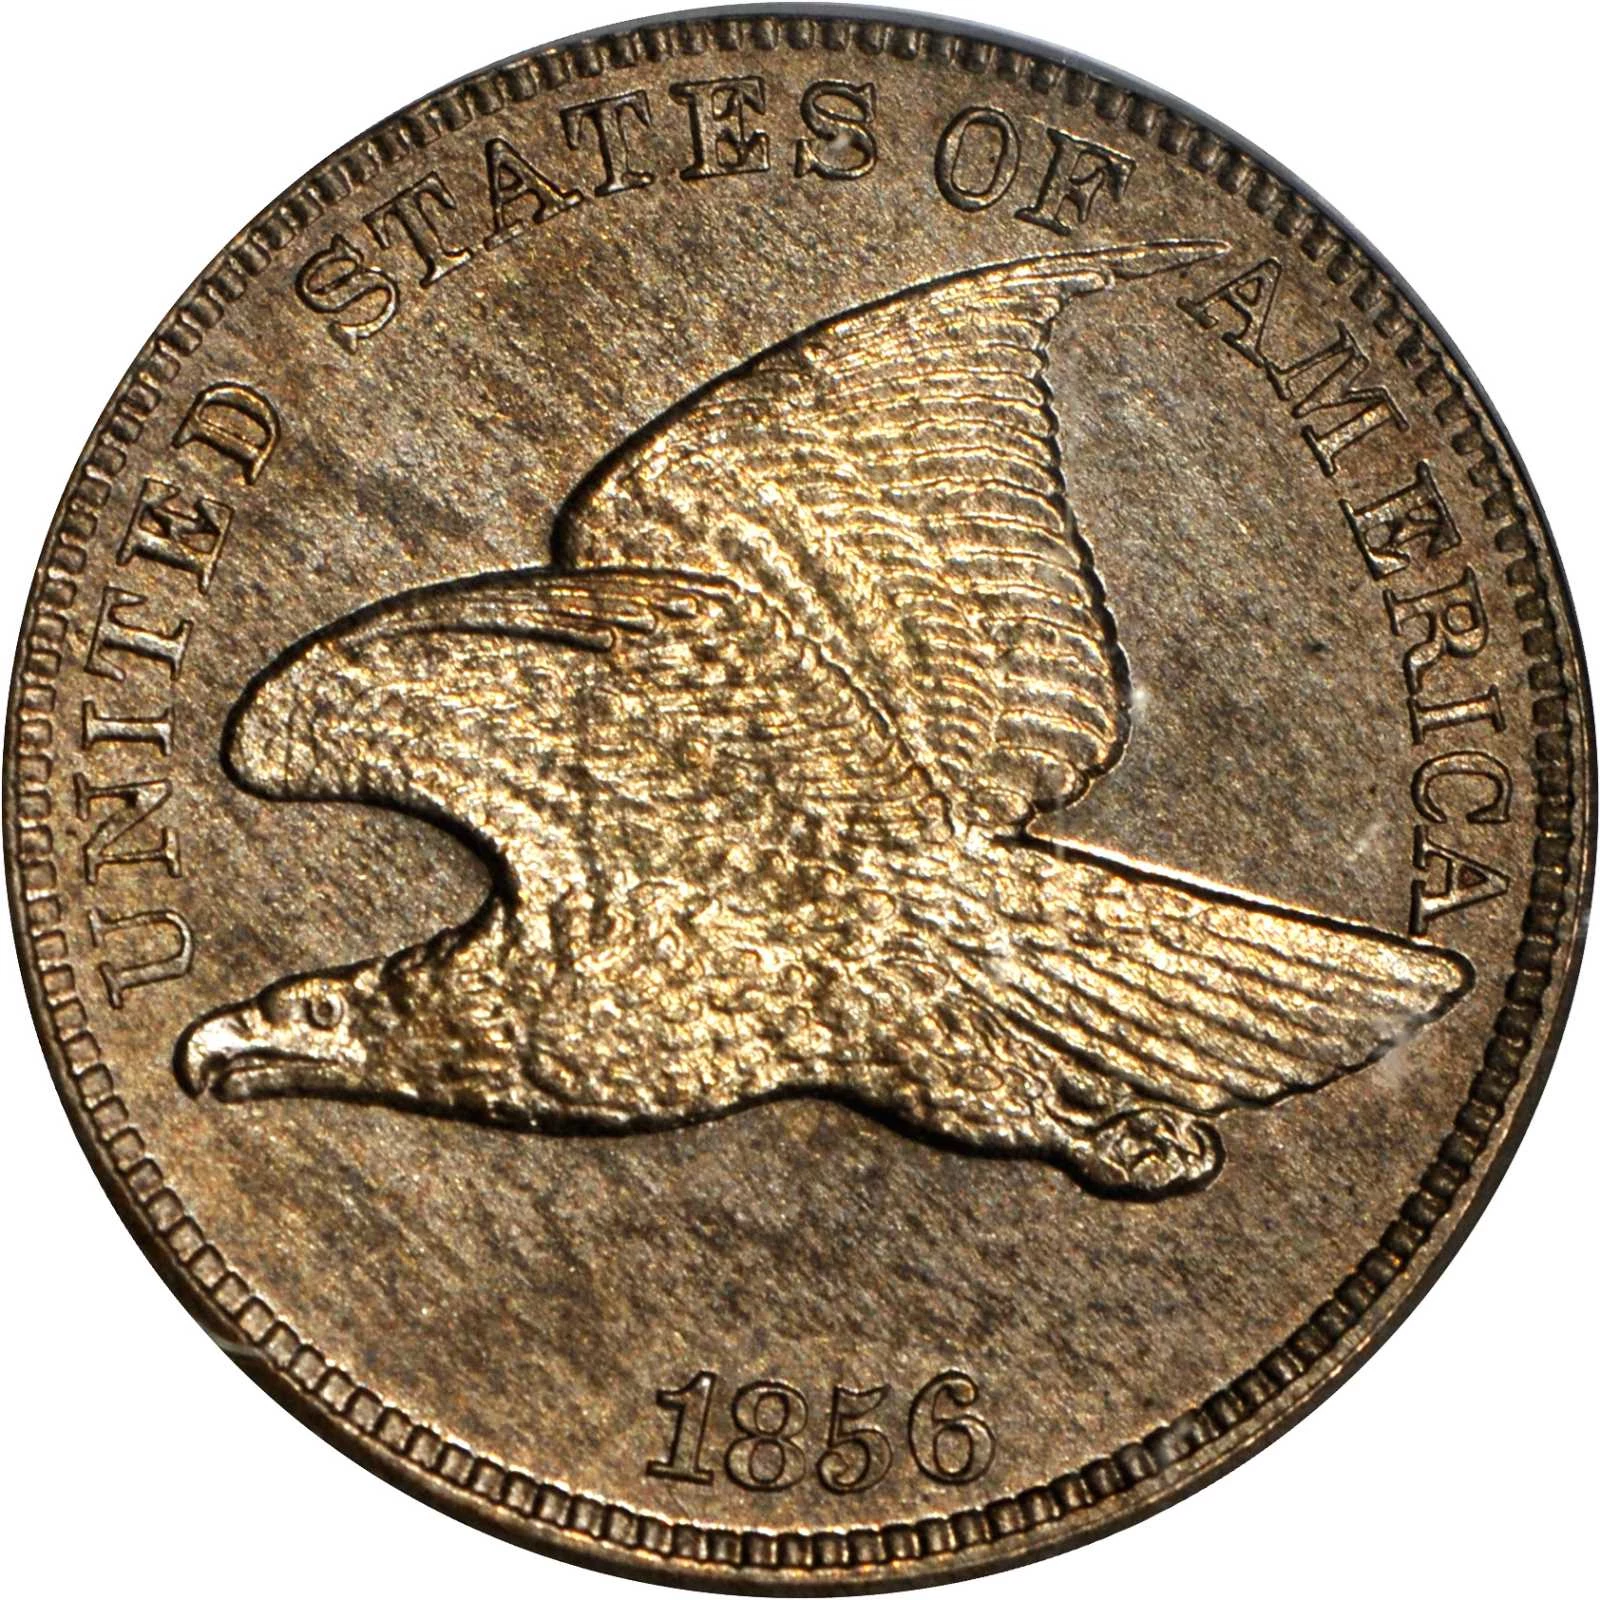 Rare Flying Eagle one cent coin sells for $11,128 - do you have